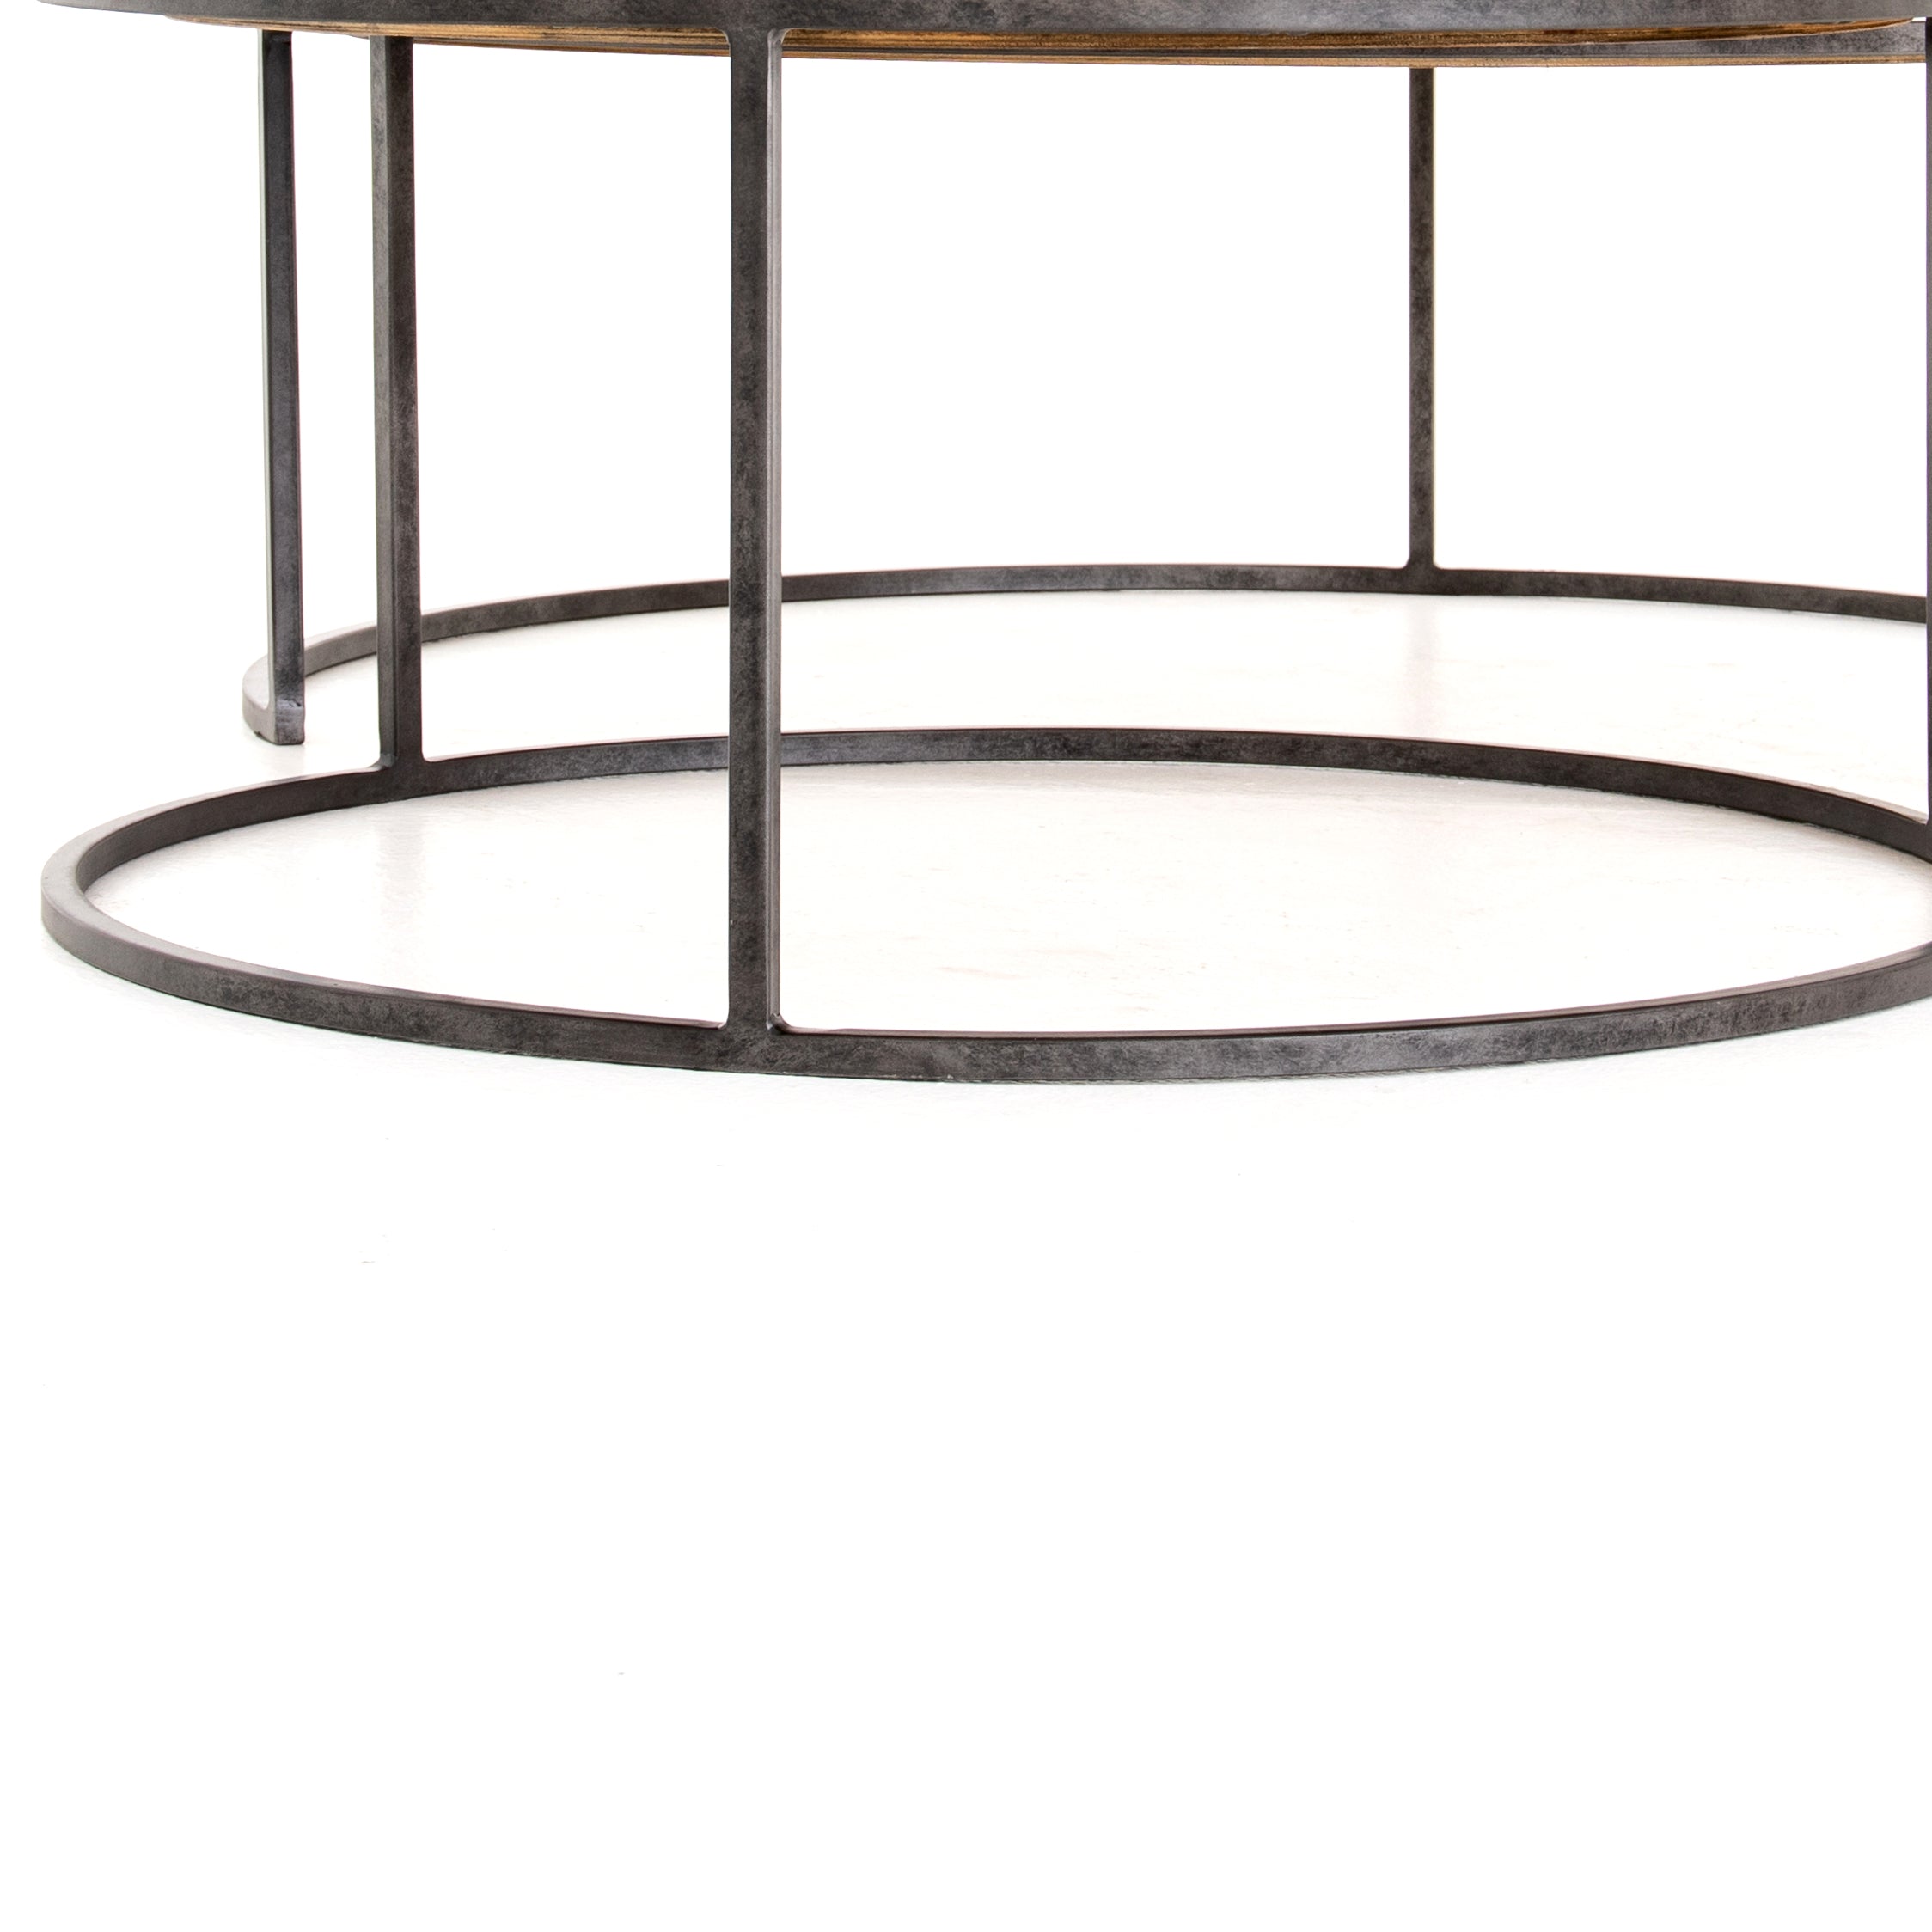 Antique Copper Cladding with Light Rustic Black Iron | Catalina Nesting Coffee Table | Valley Ridge Furniture